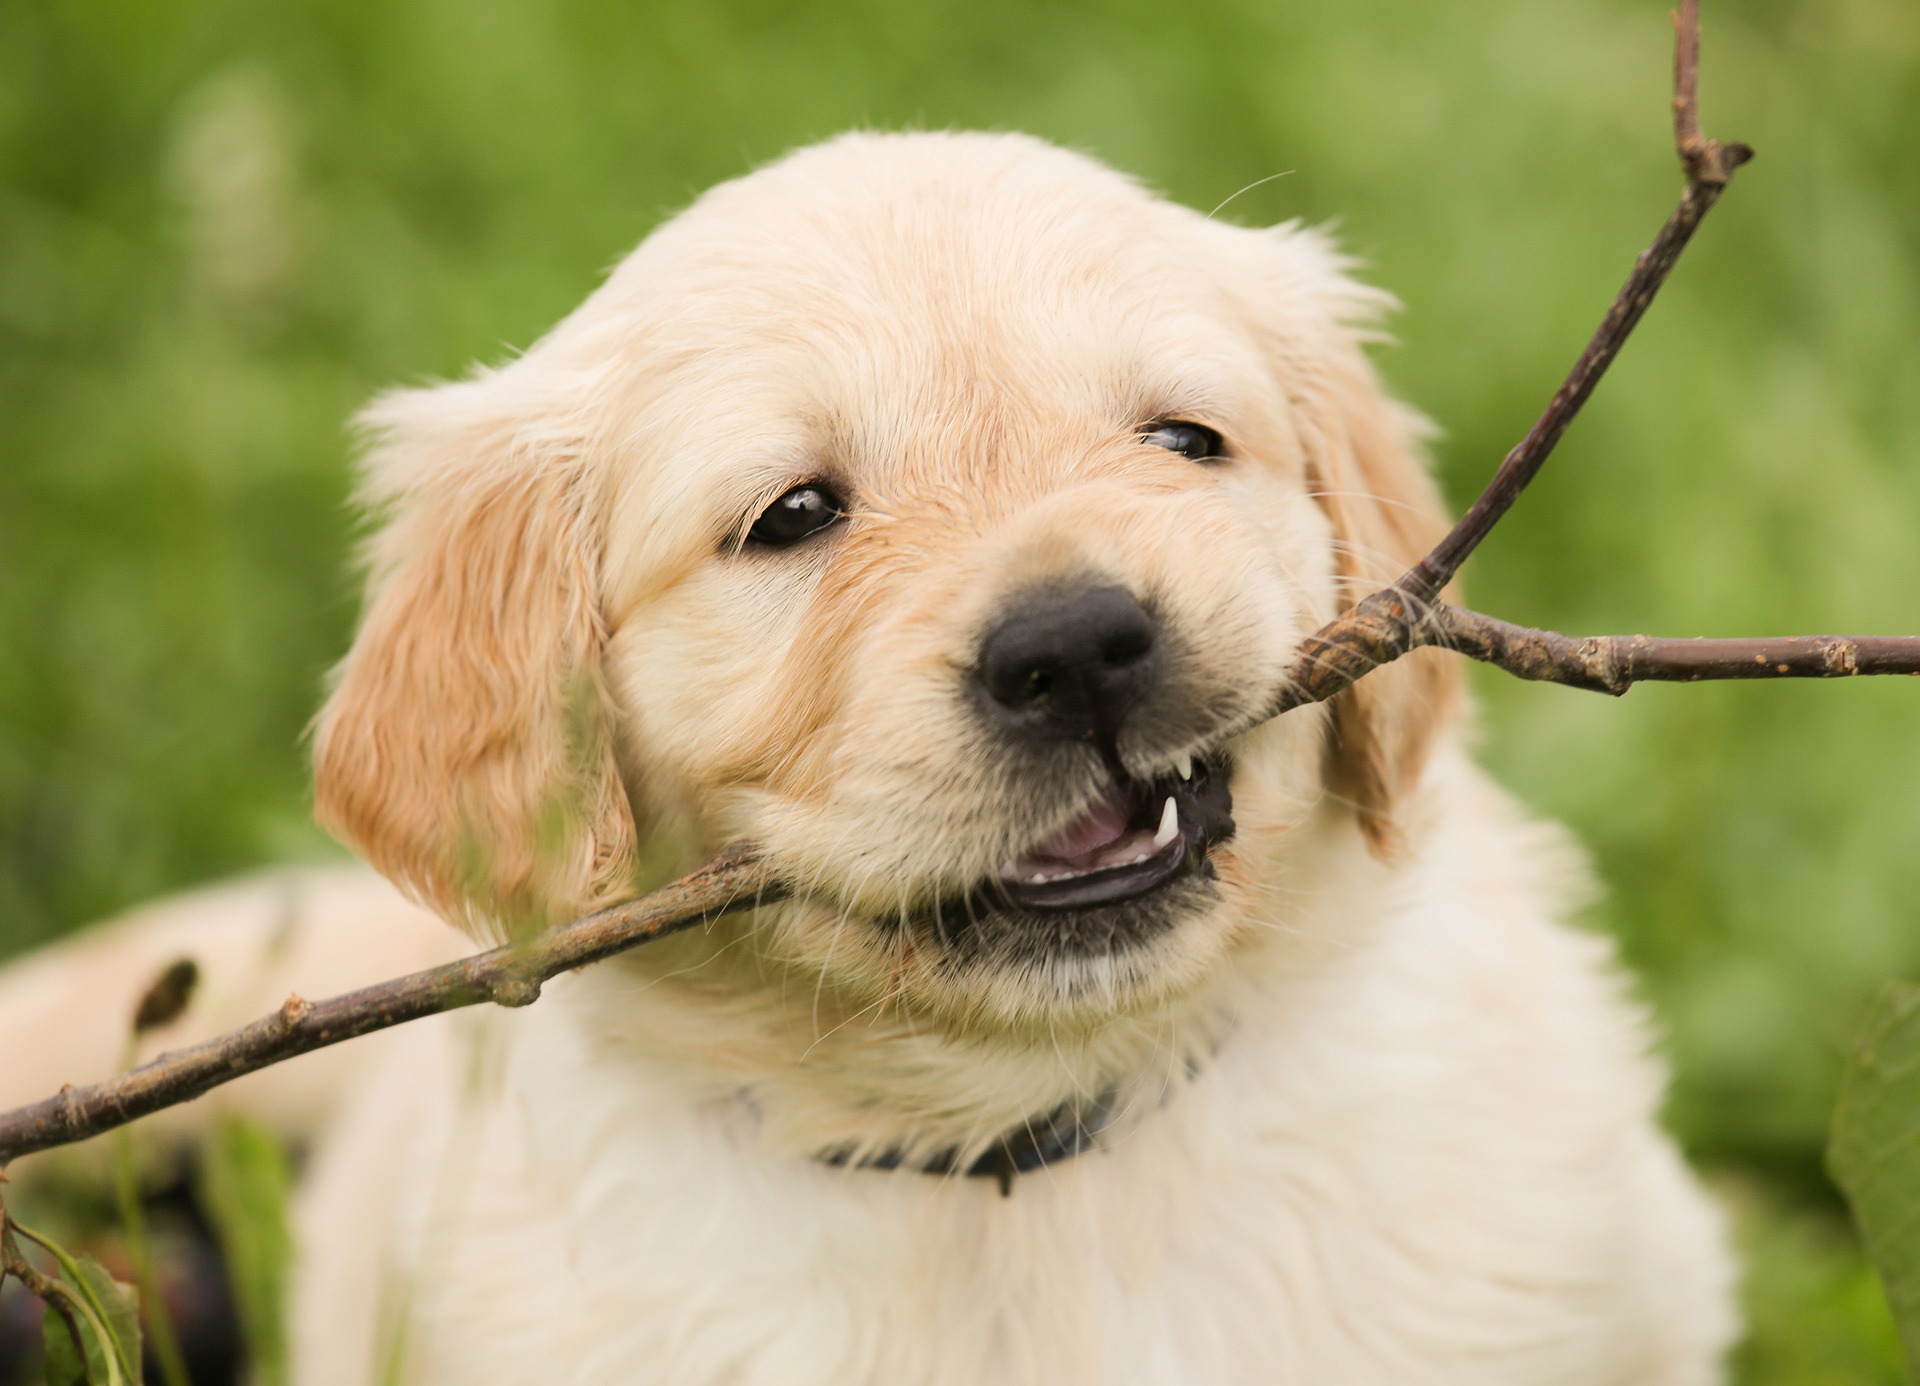 Can dogs chew on pine branches